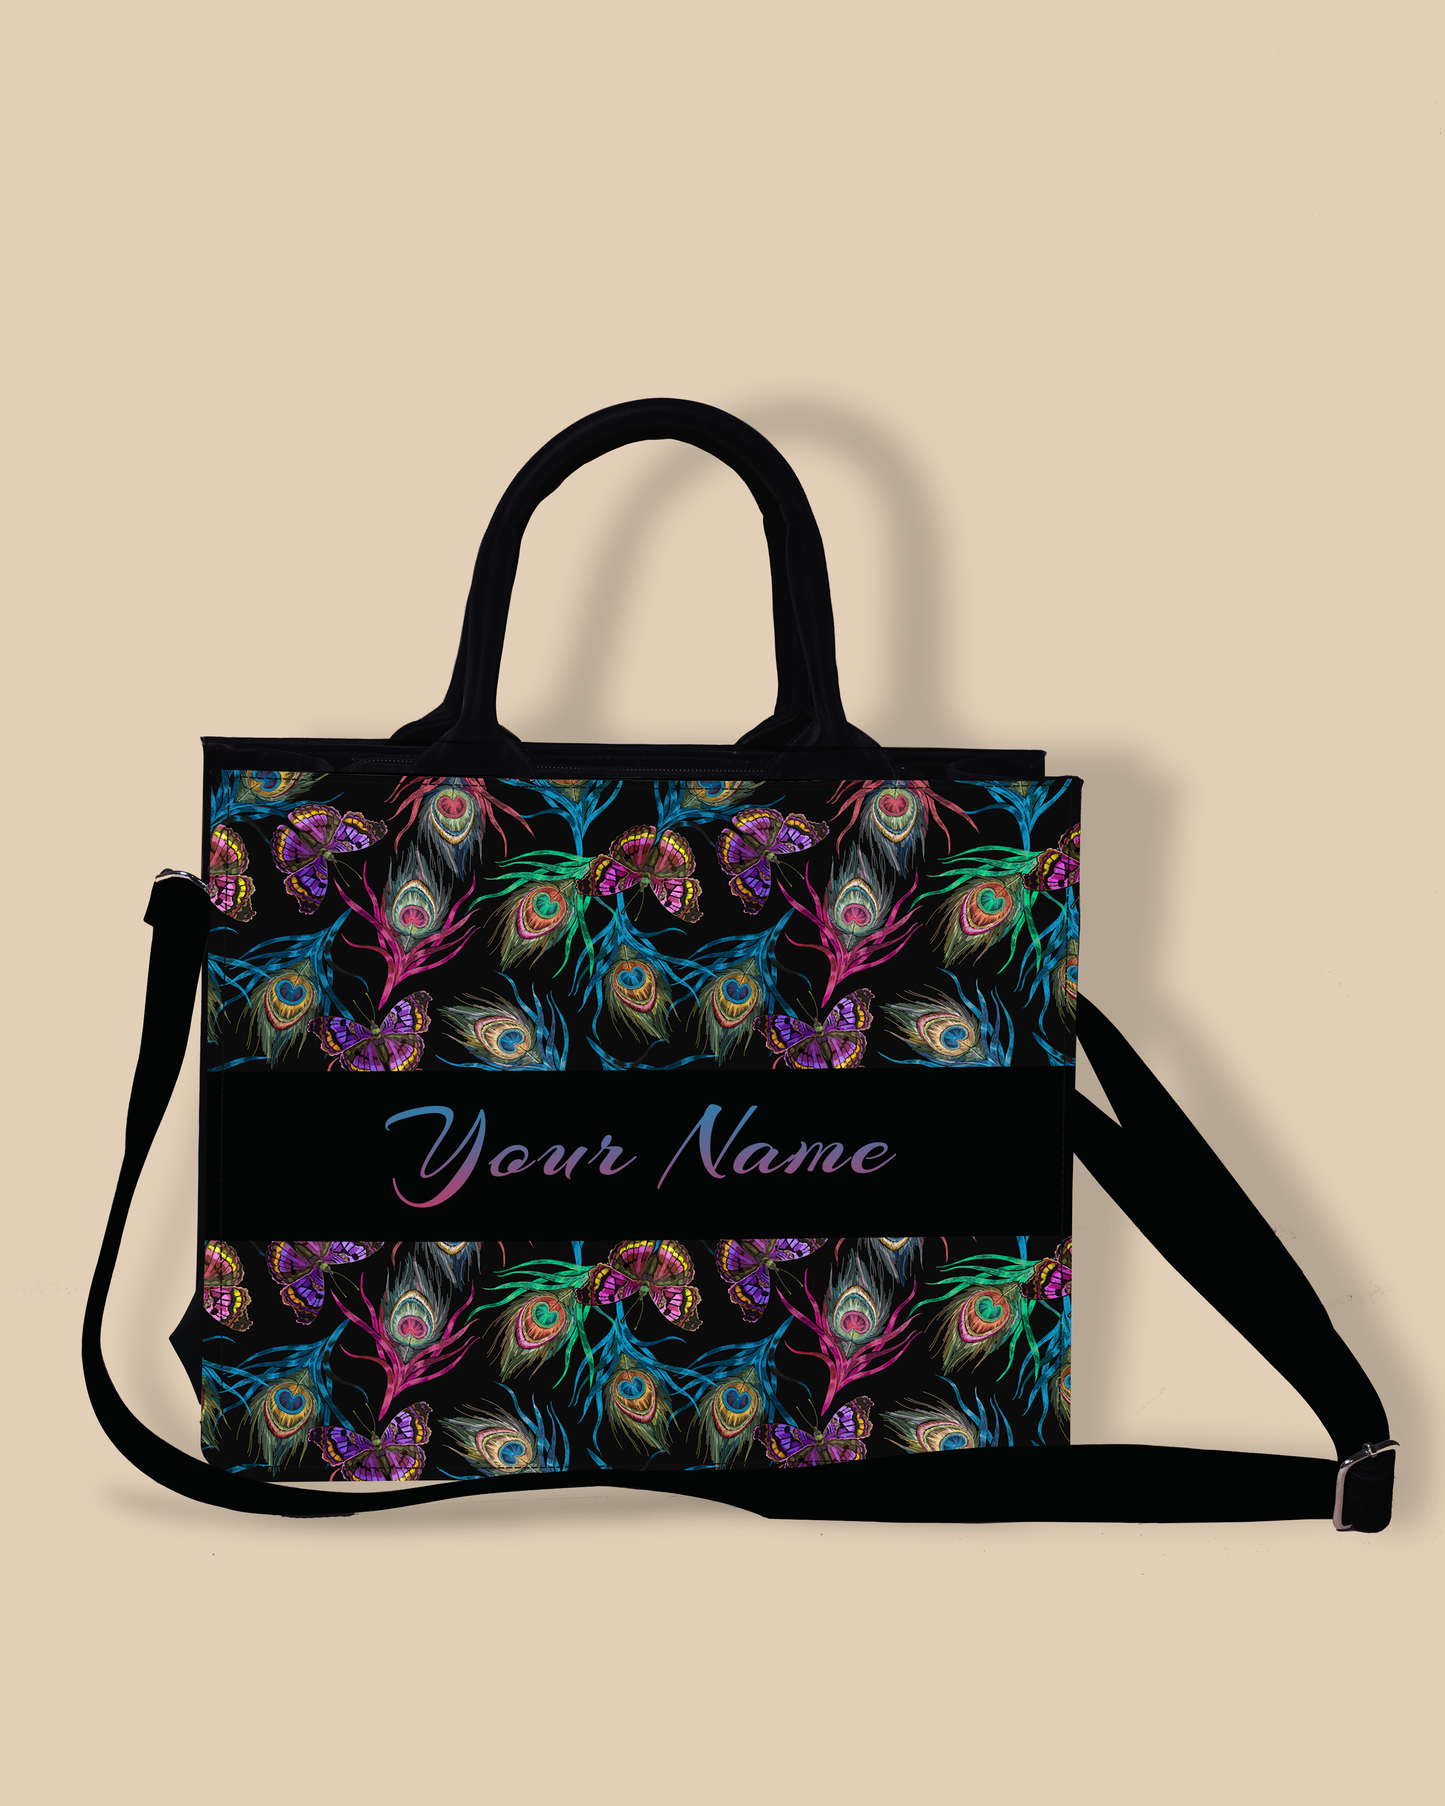 Customized small Tote Bag Designed With Colourful Peacock Feather And Flying Butterflies Pattern